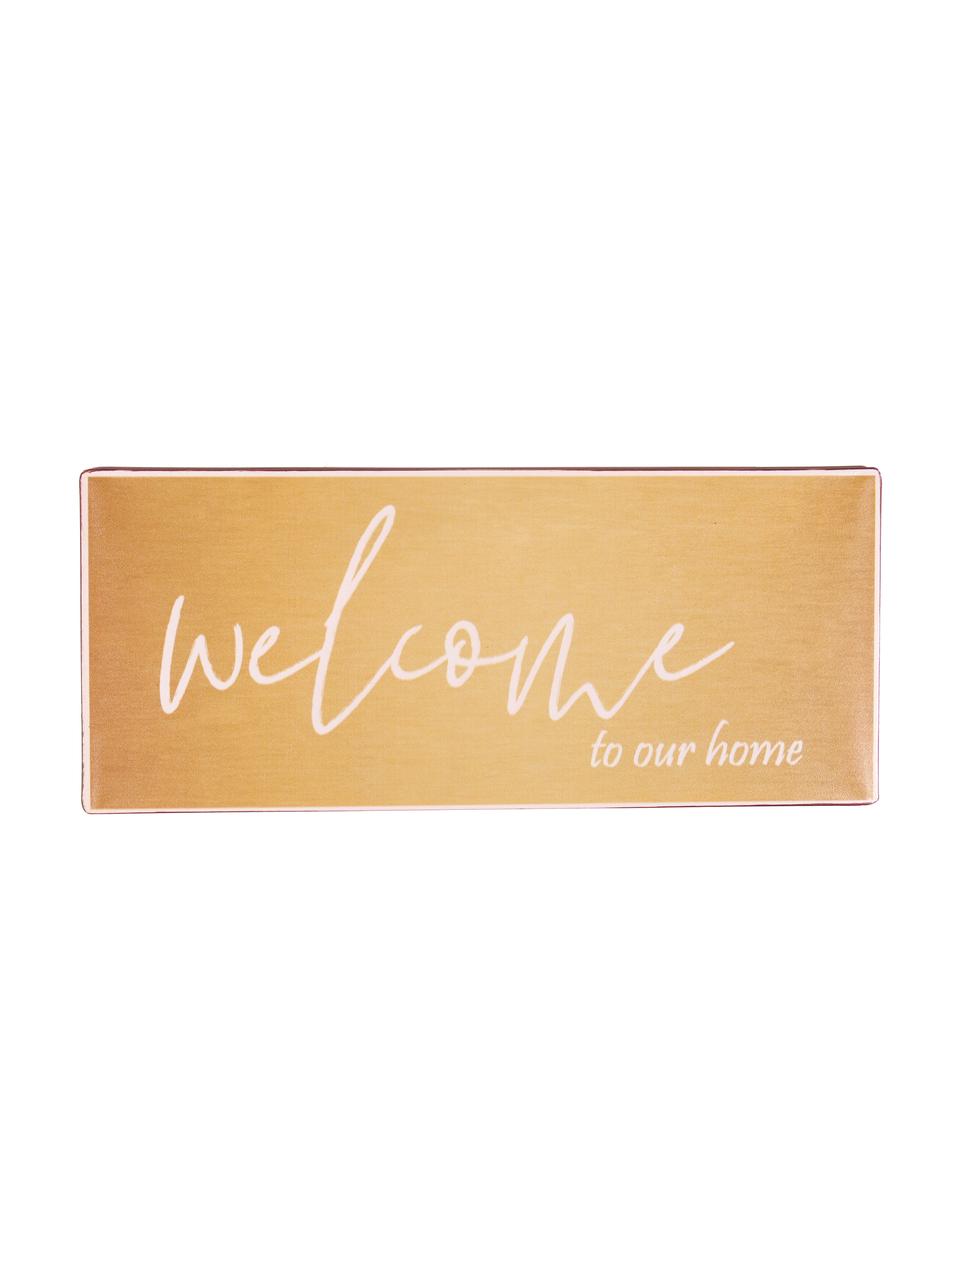 Wandbord Welcome to our home, Gecoat metaal, Oranje, wit, 31 x 13 cm